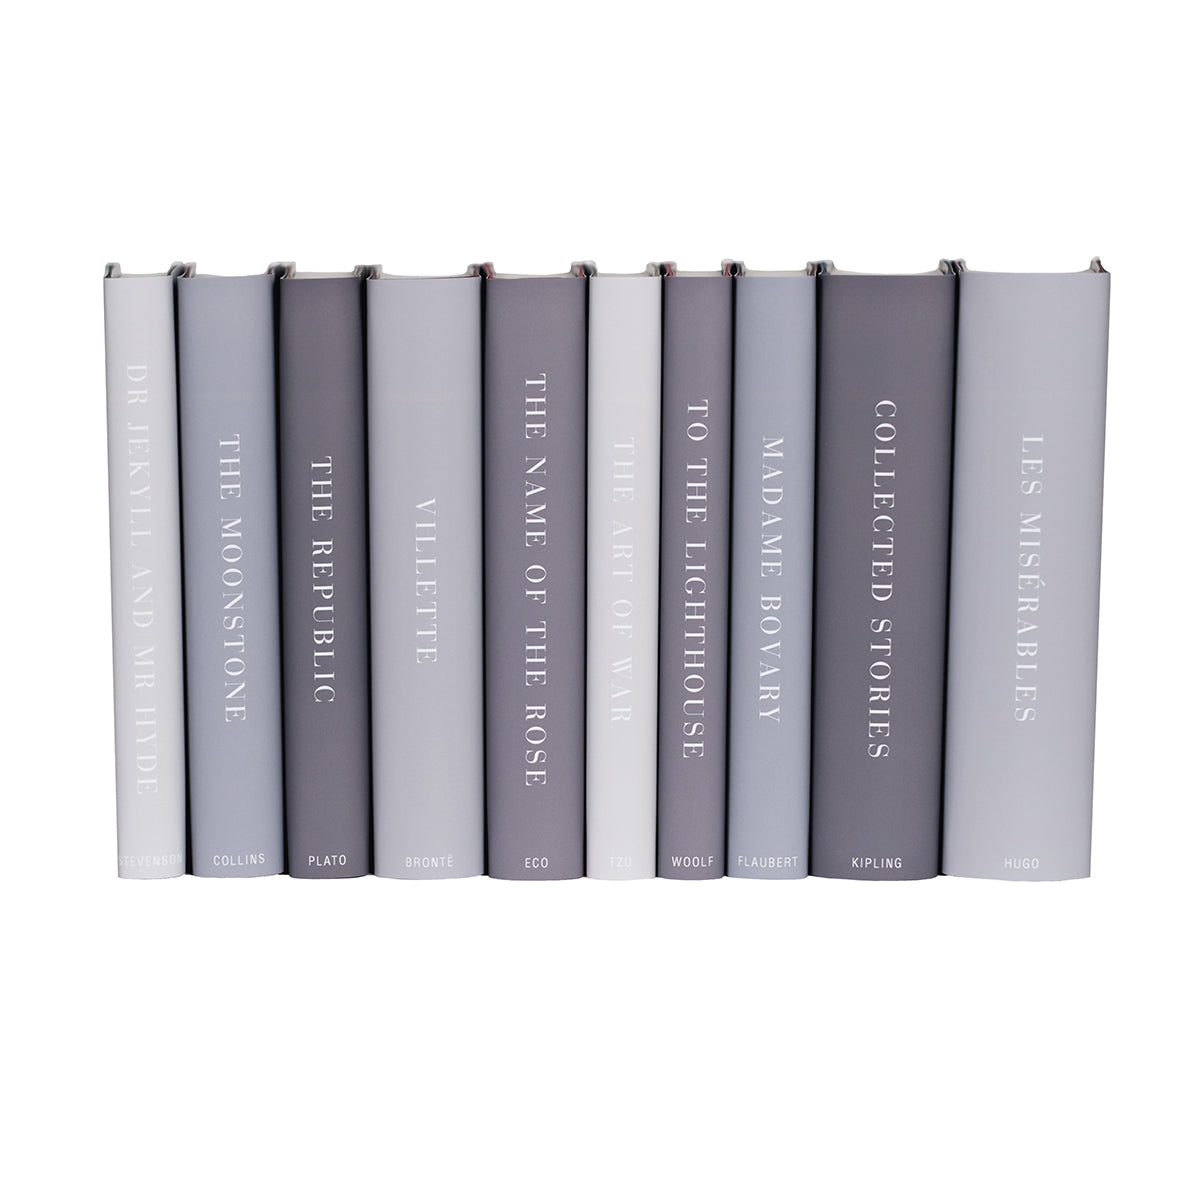 Everyman's Library Classics with Modern-Style Jackets in Sets of 10